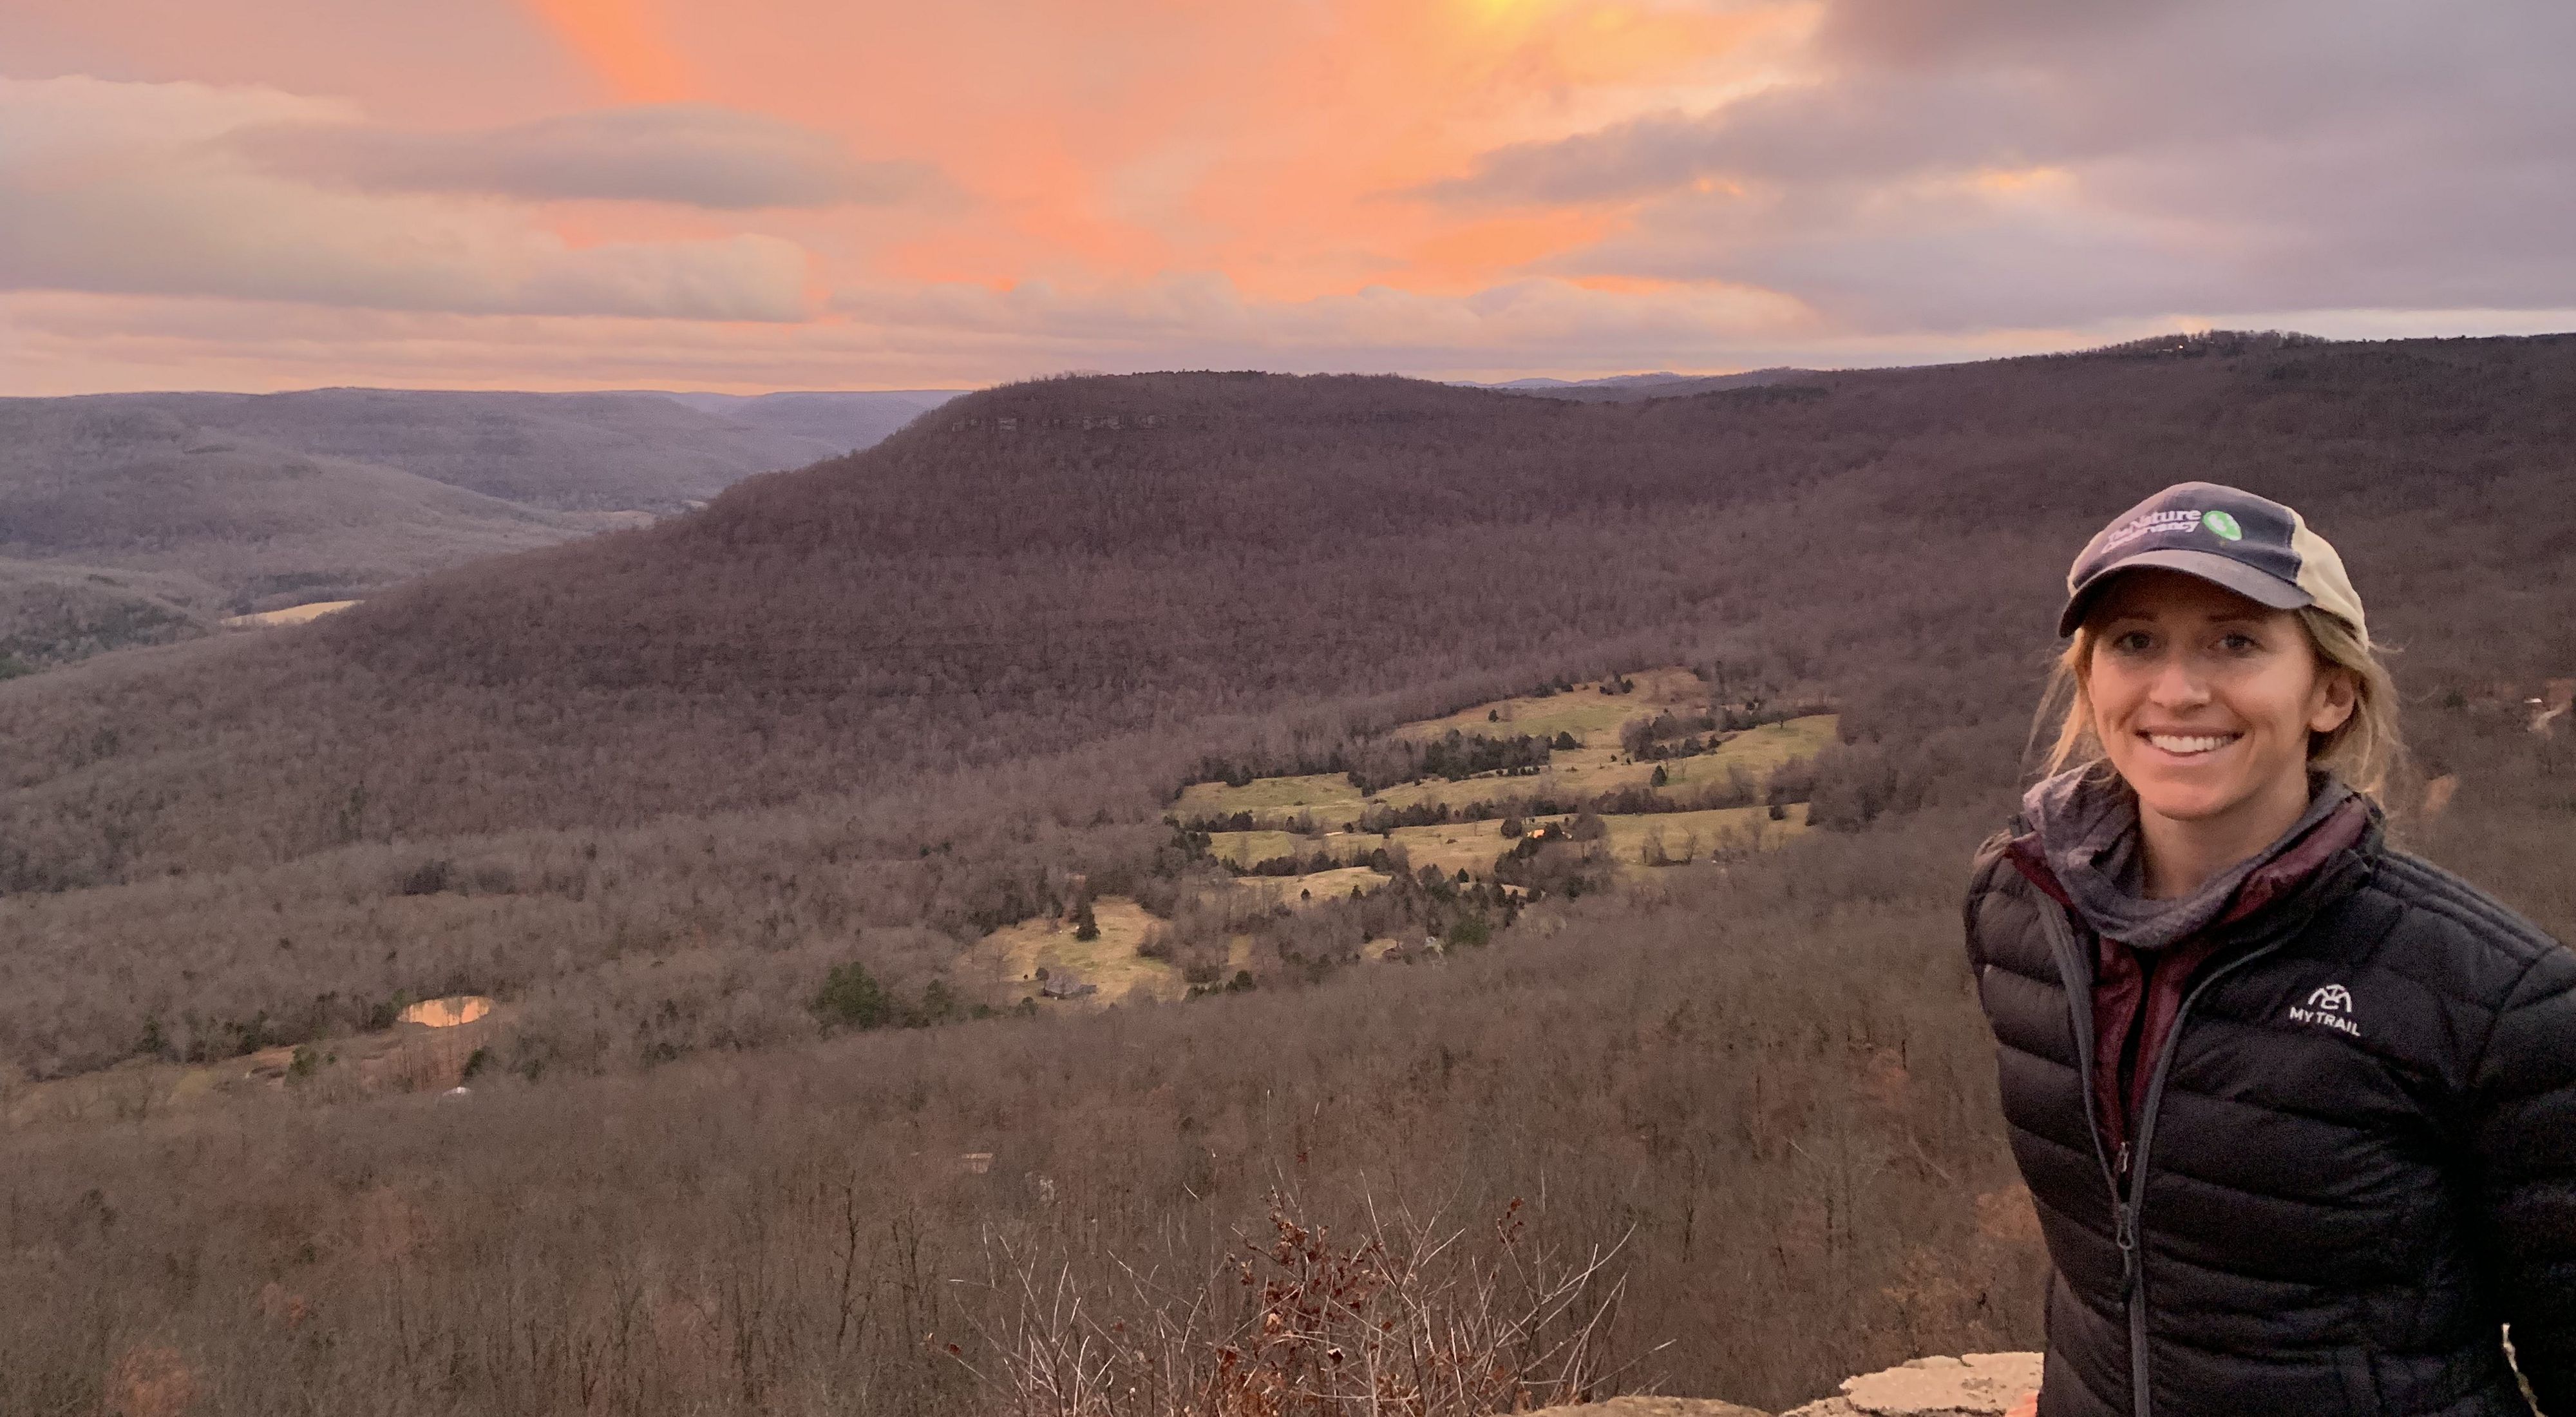 Hannah Birgé stands in front of a rock outcropping under a pinkish sunset sky.